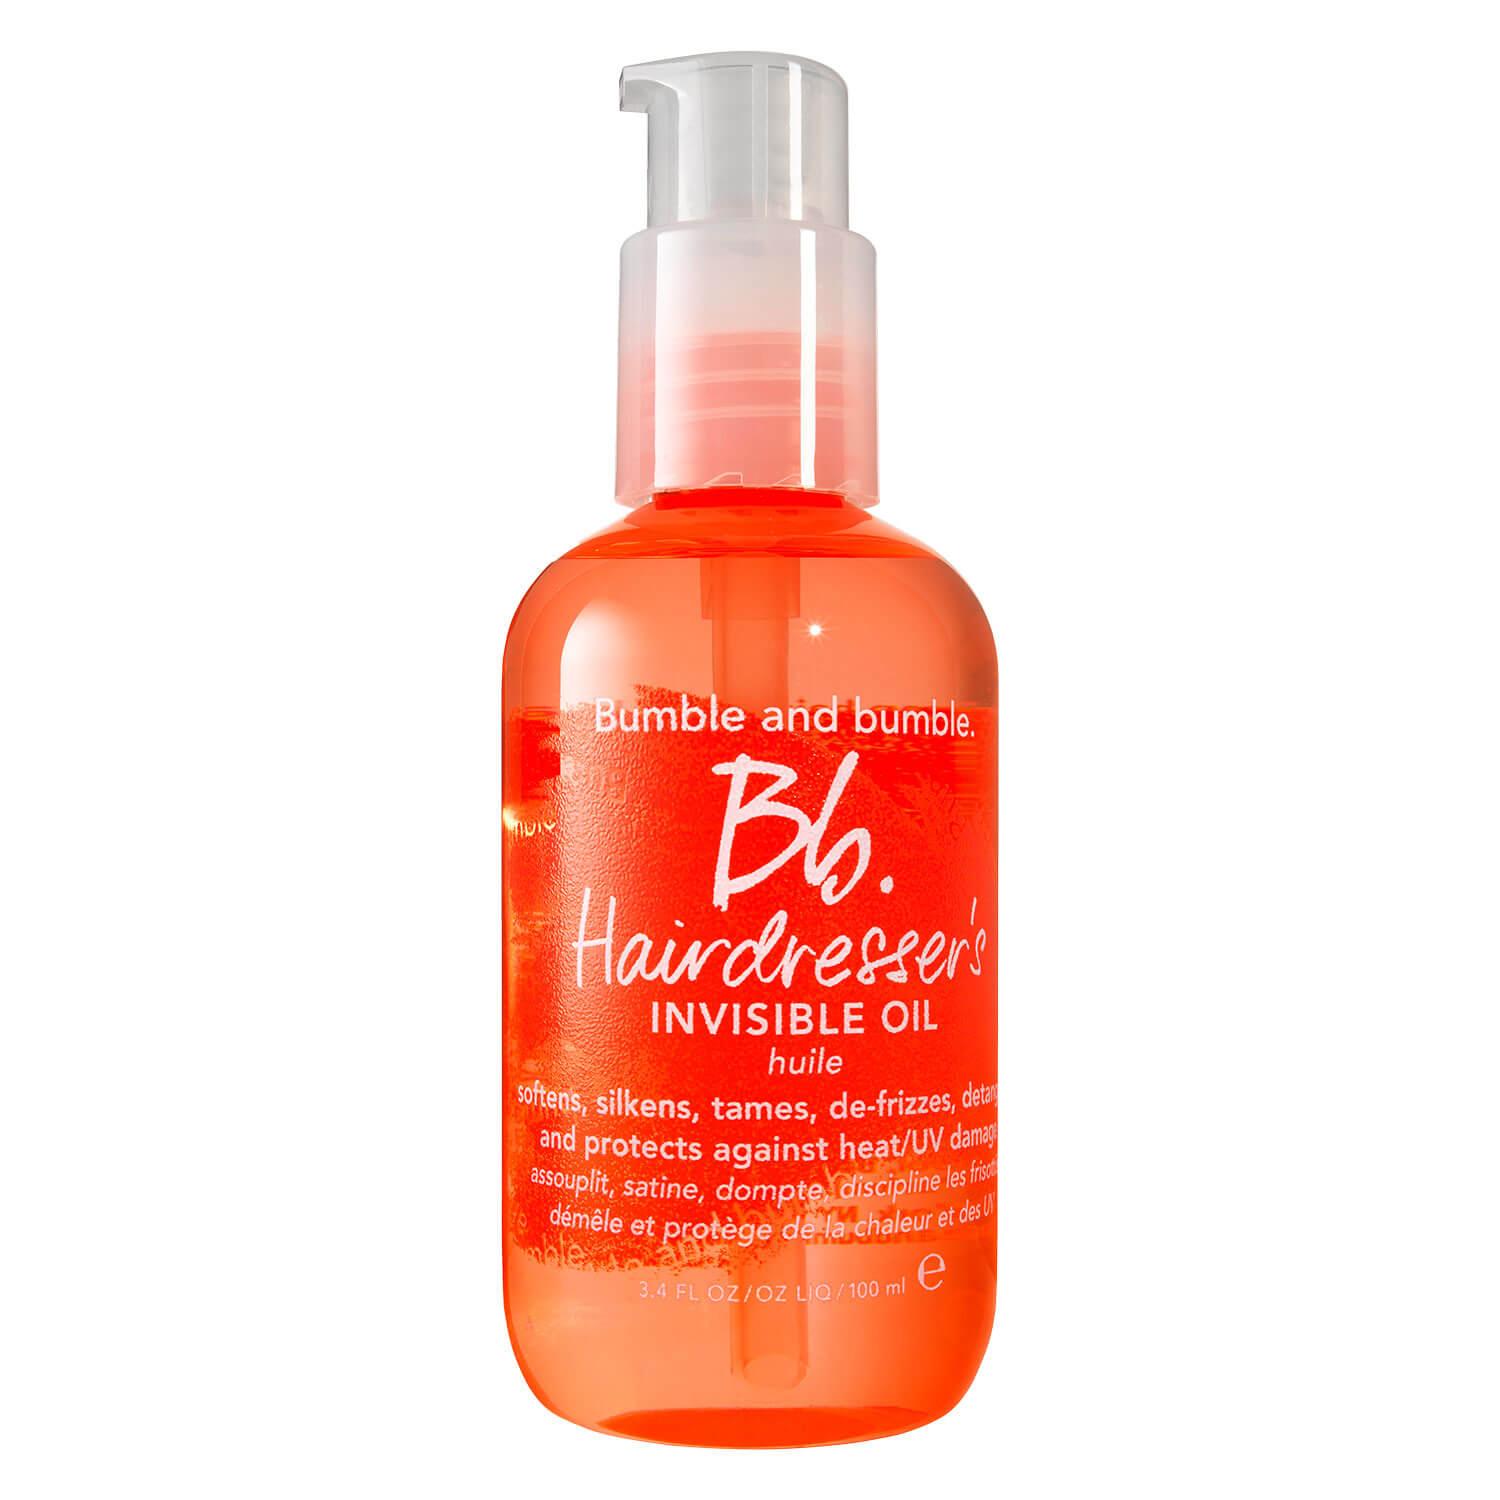 Bb. Hairdresser's Invisible Oil - Hairdresser's Invisible Oil